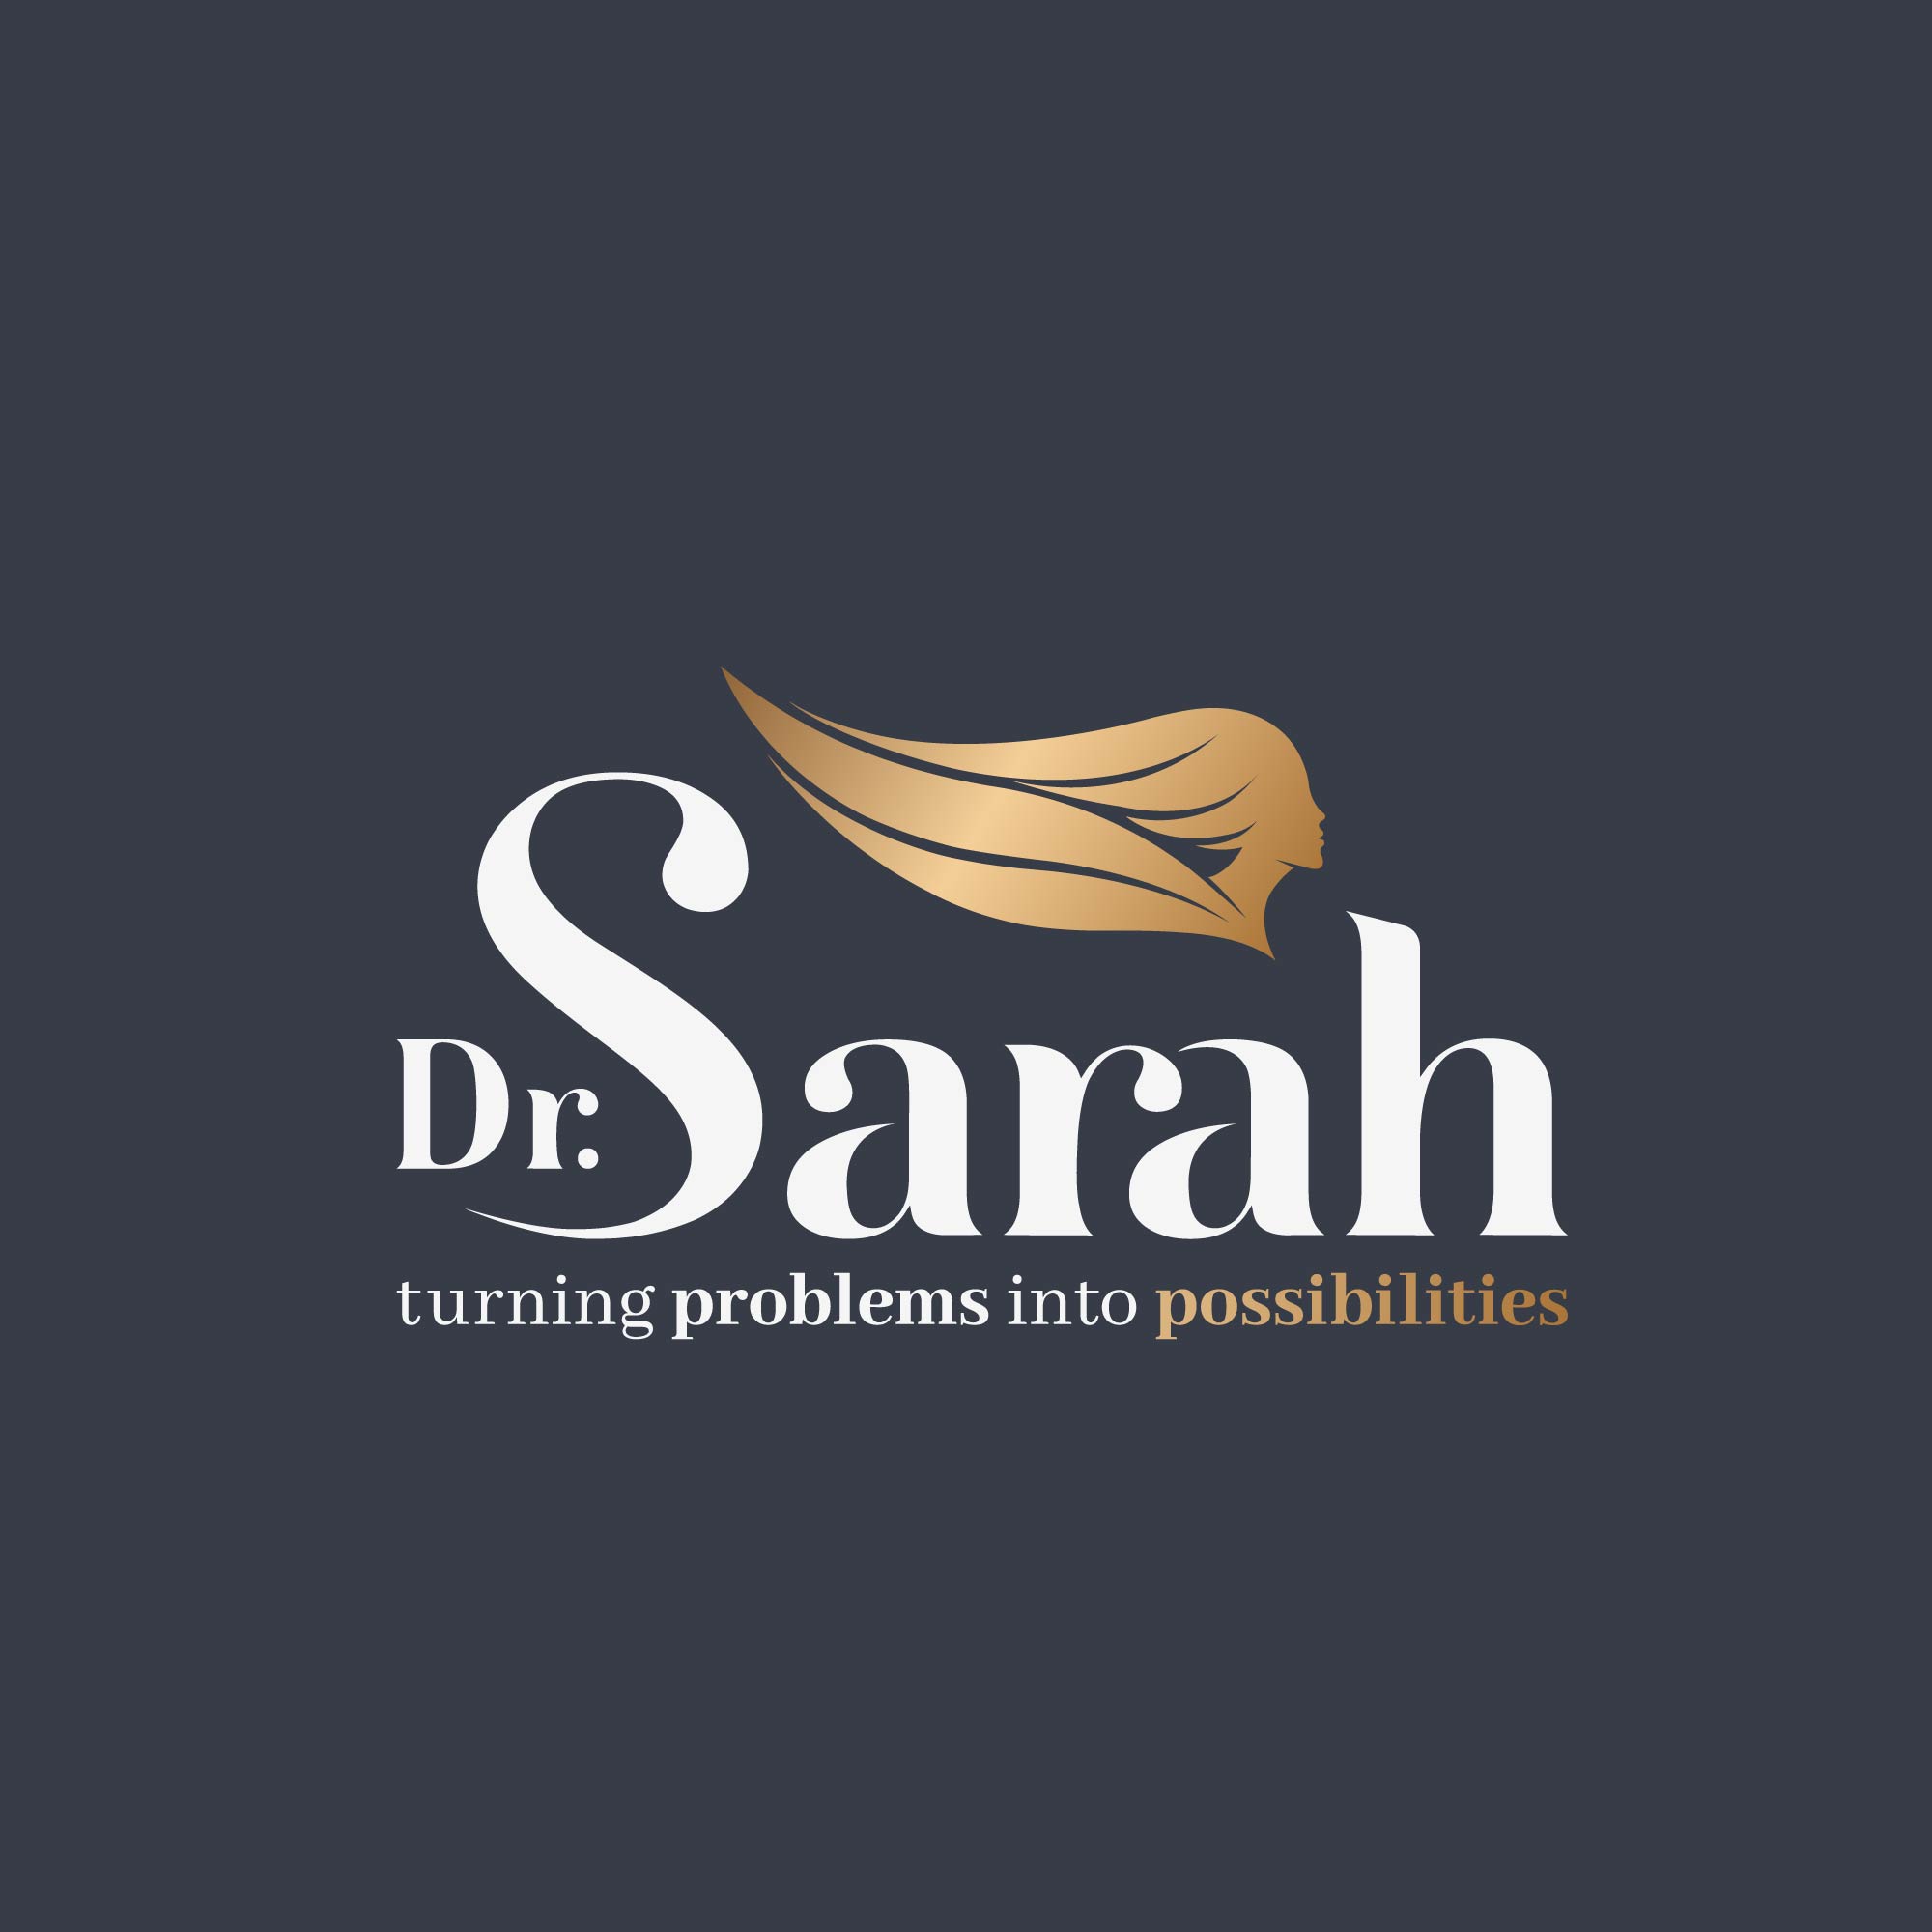 4YOU: Learn about The North Sarah Food Hub's mission